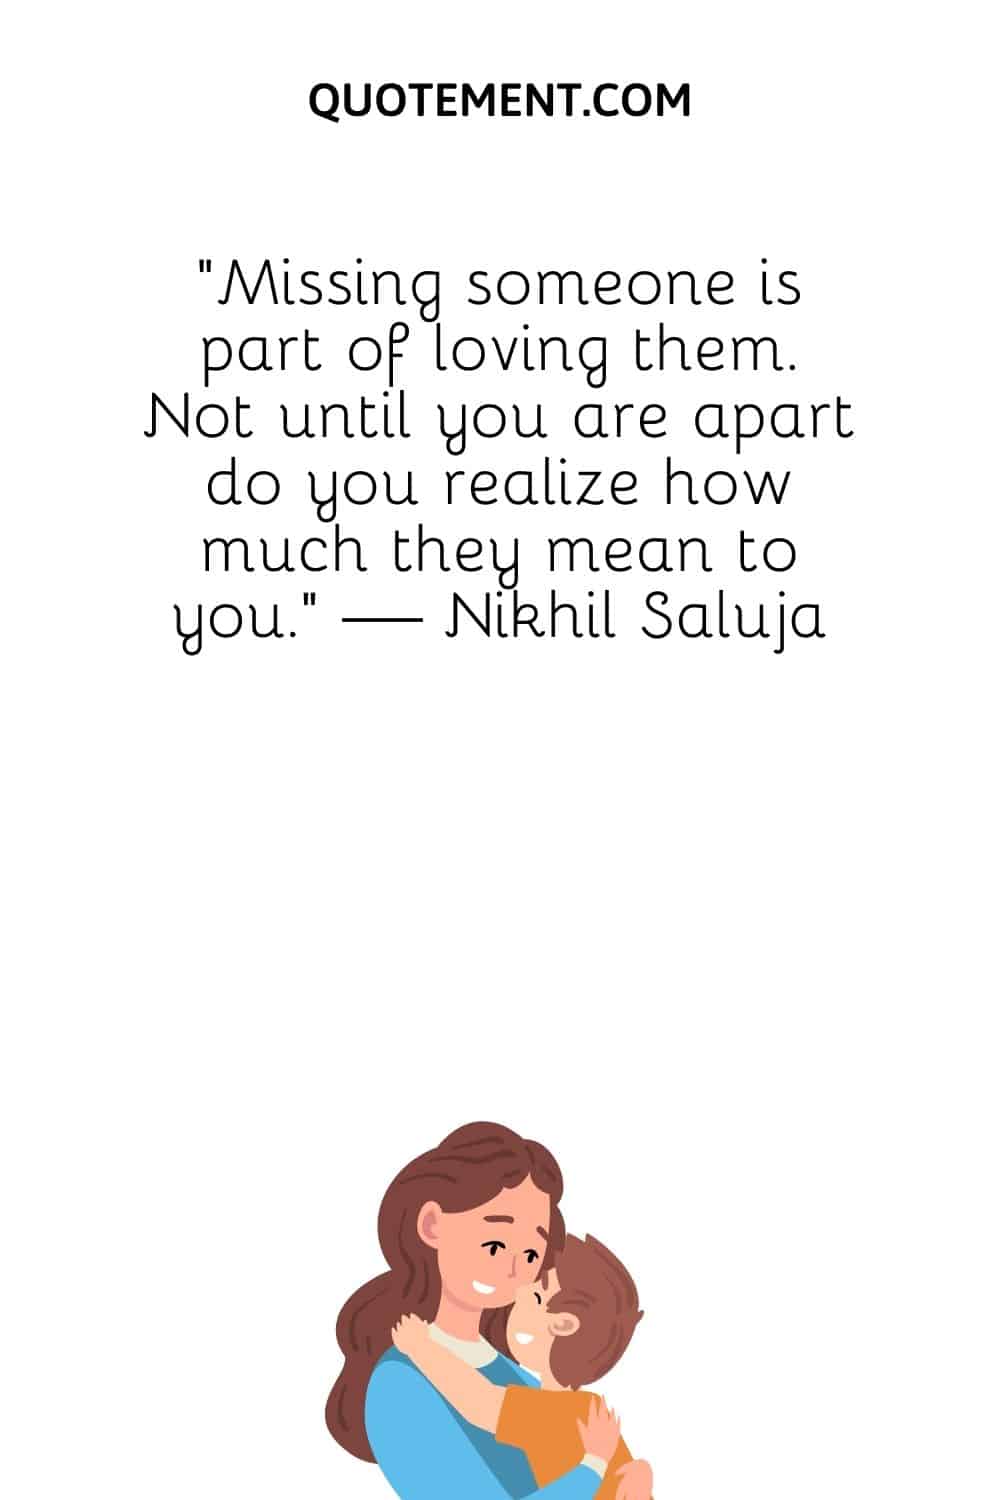 Missing someone is part of loving them